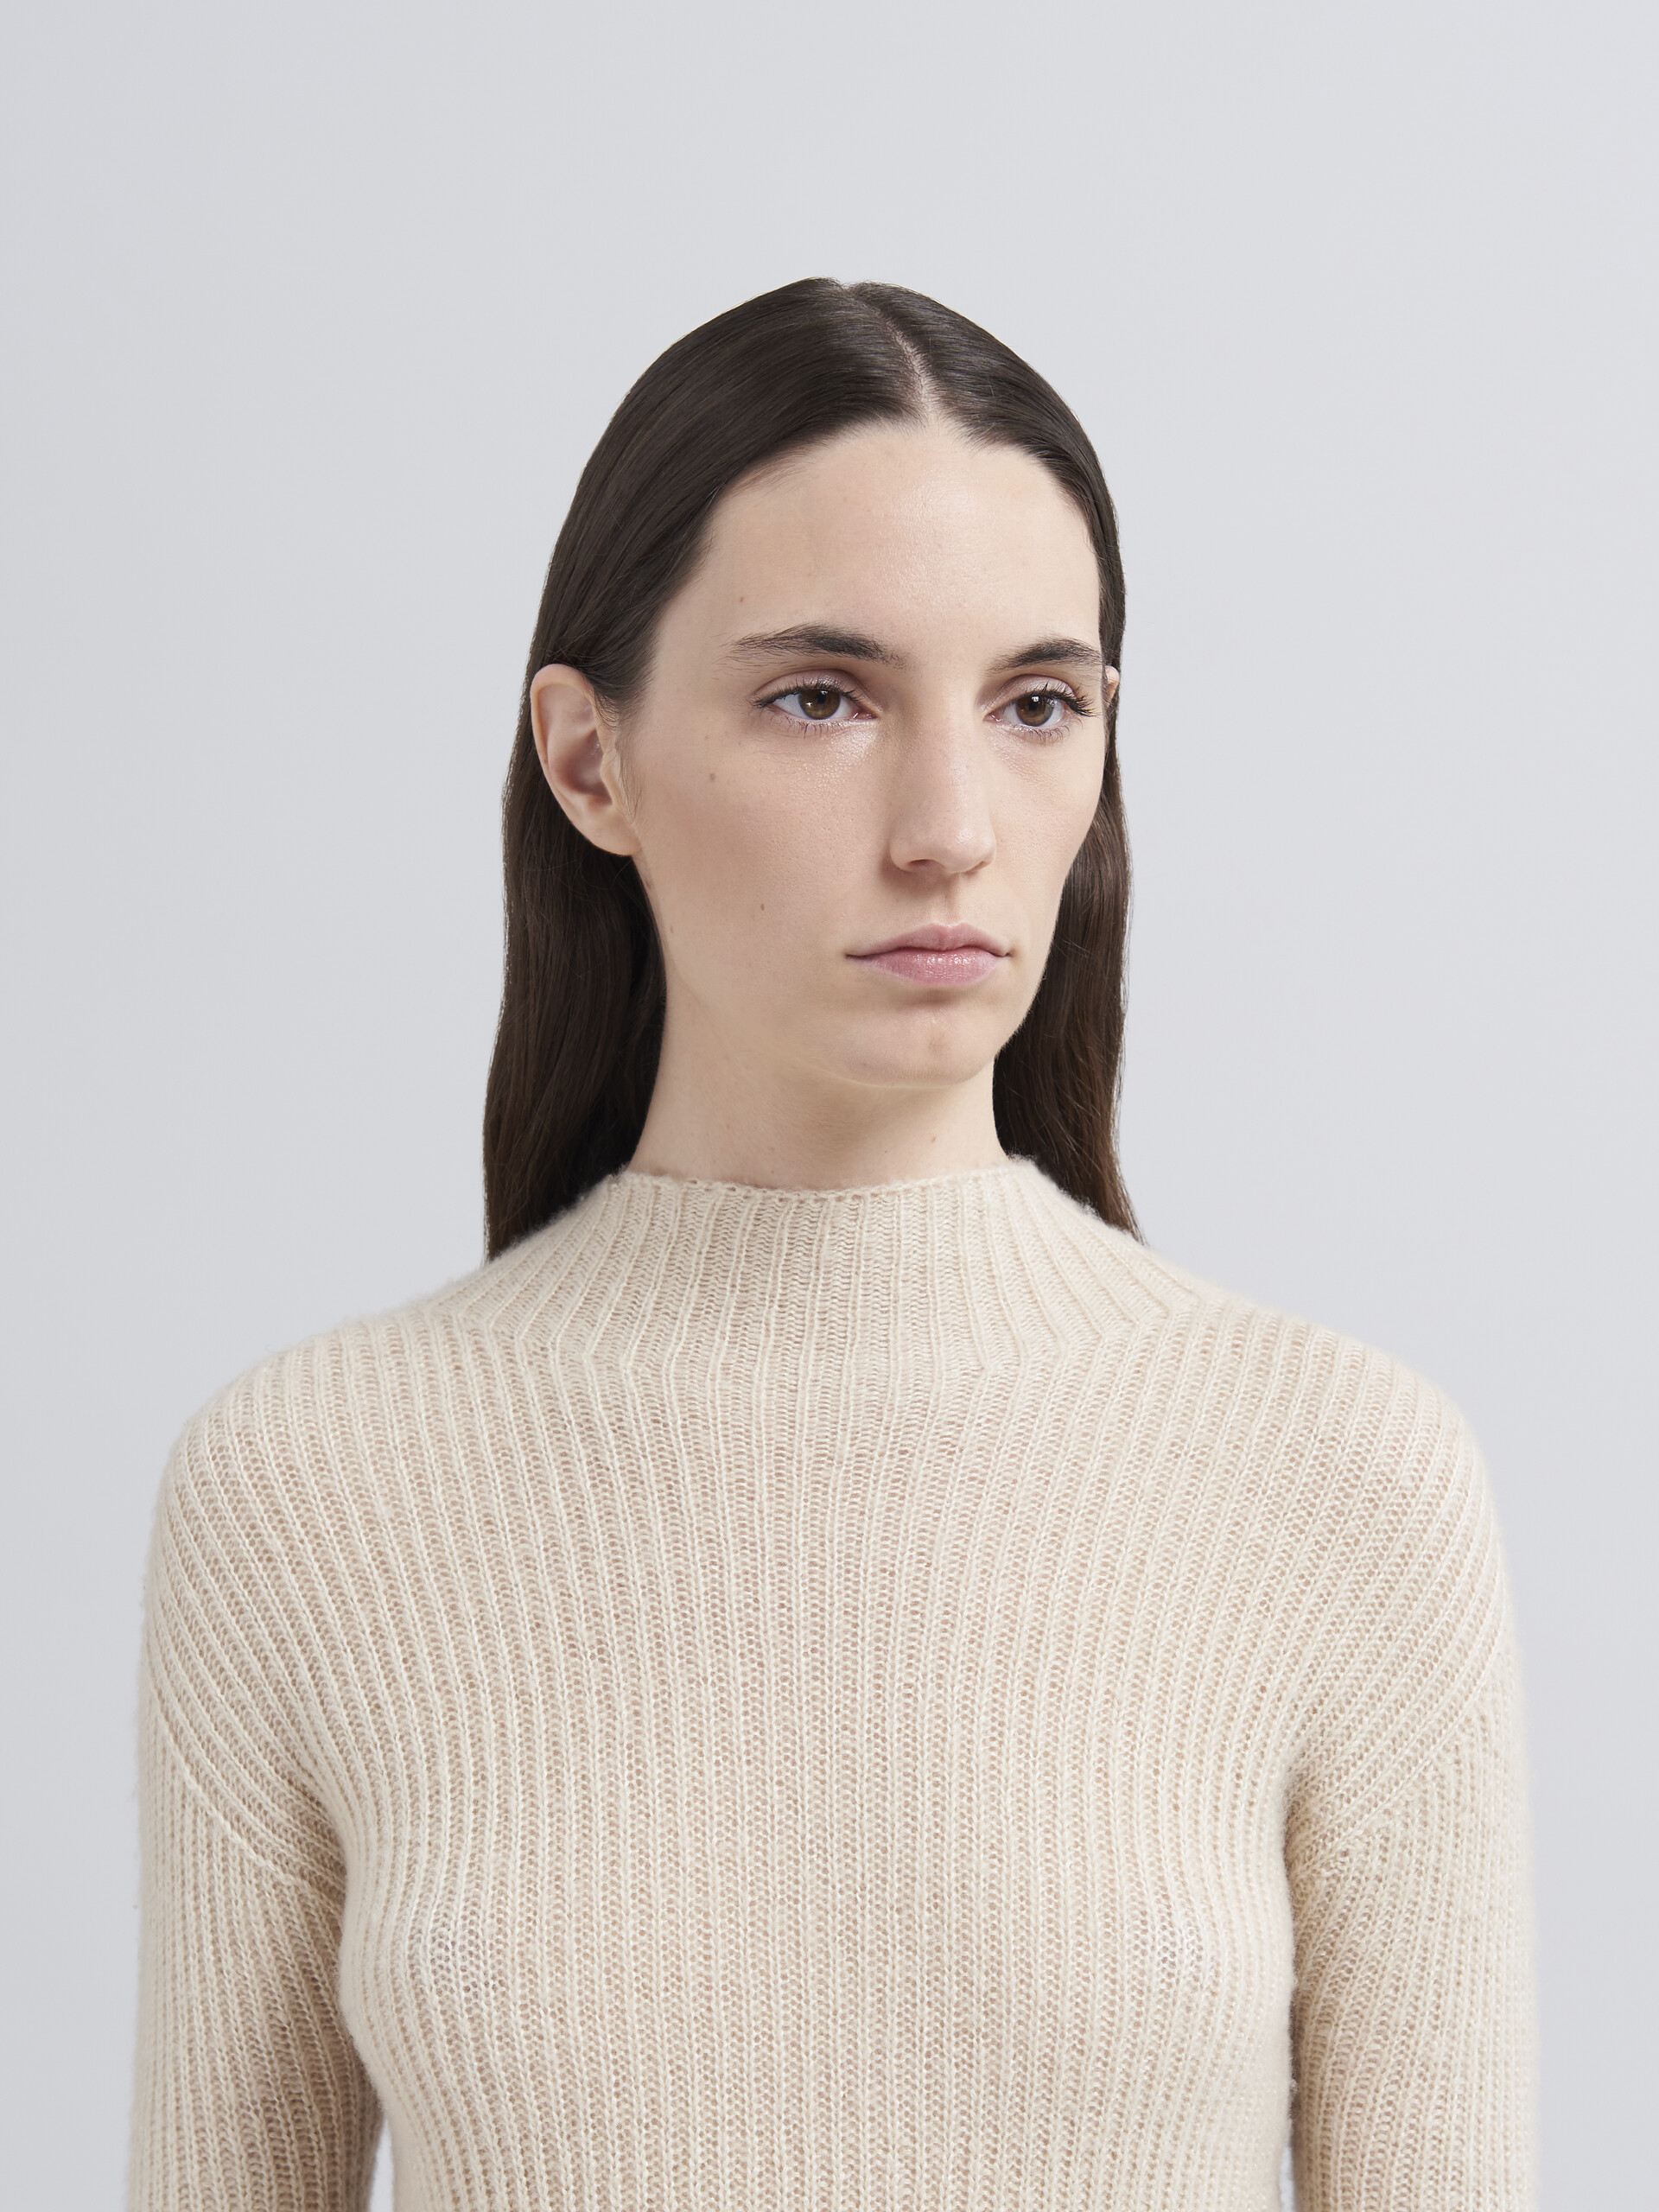 Silk and cashmere sweater - Pullovers - Image 4